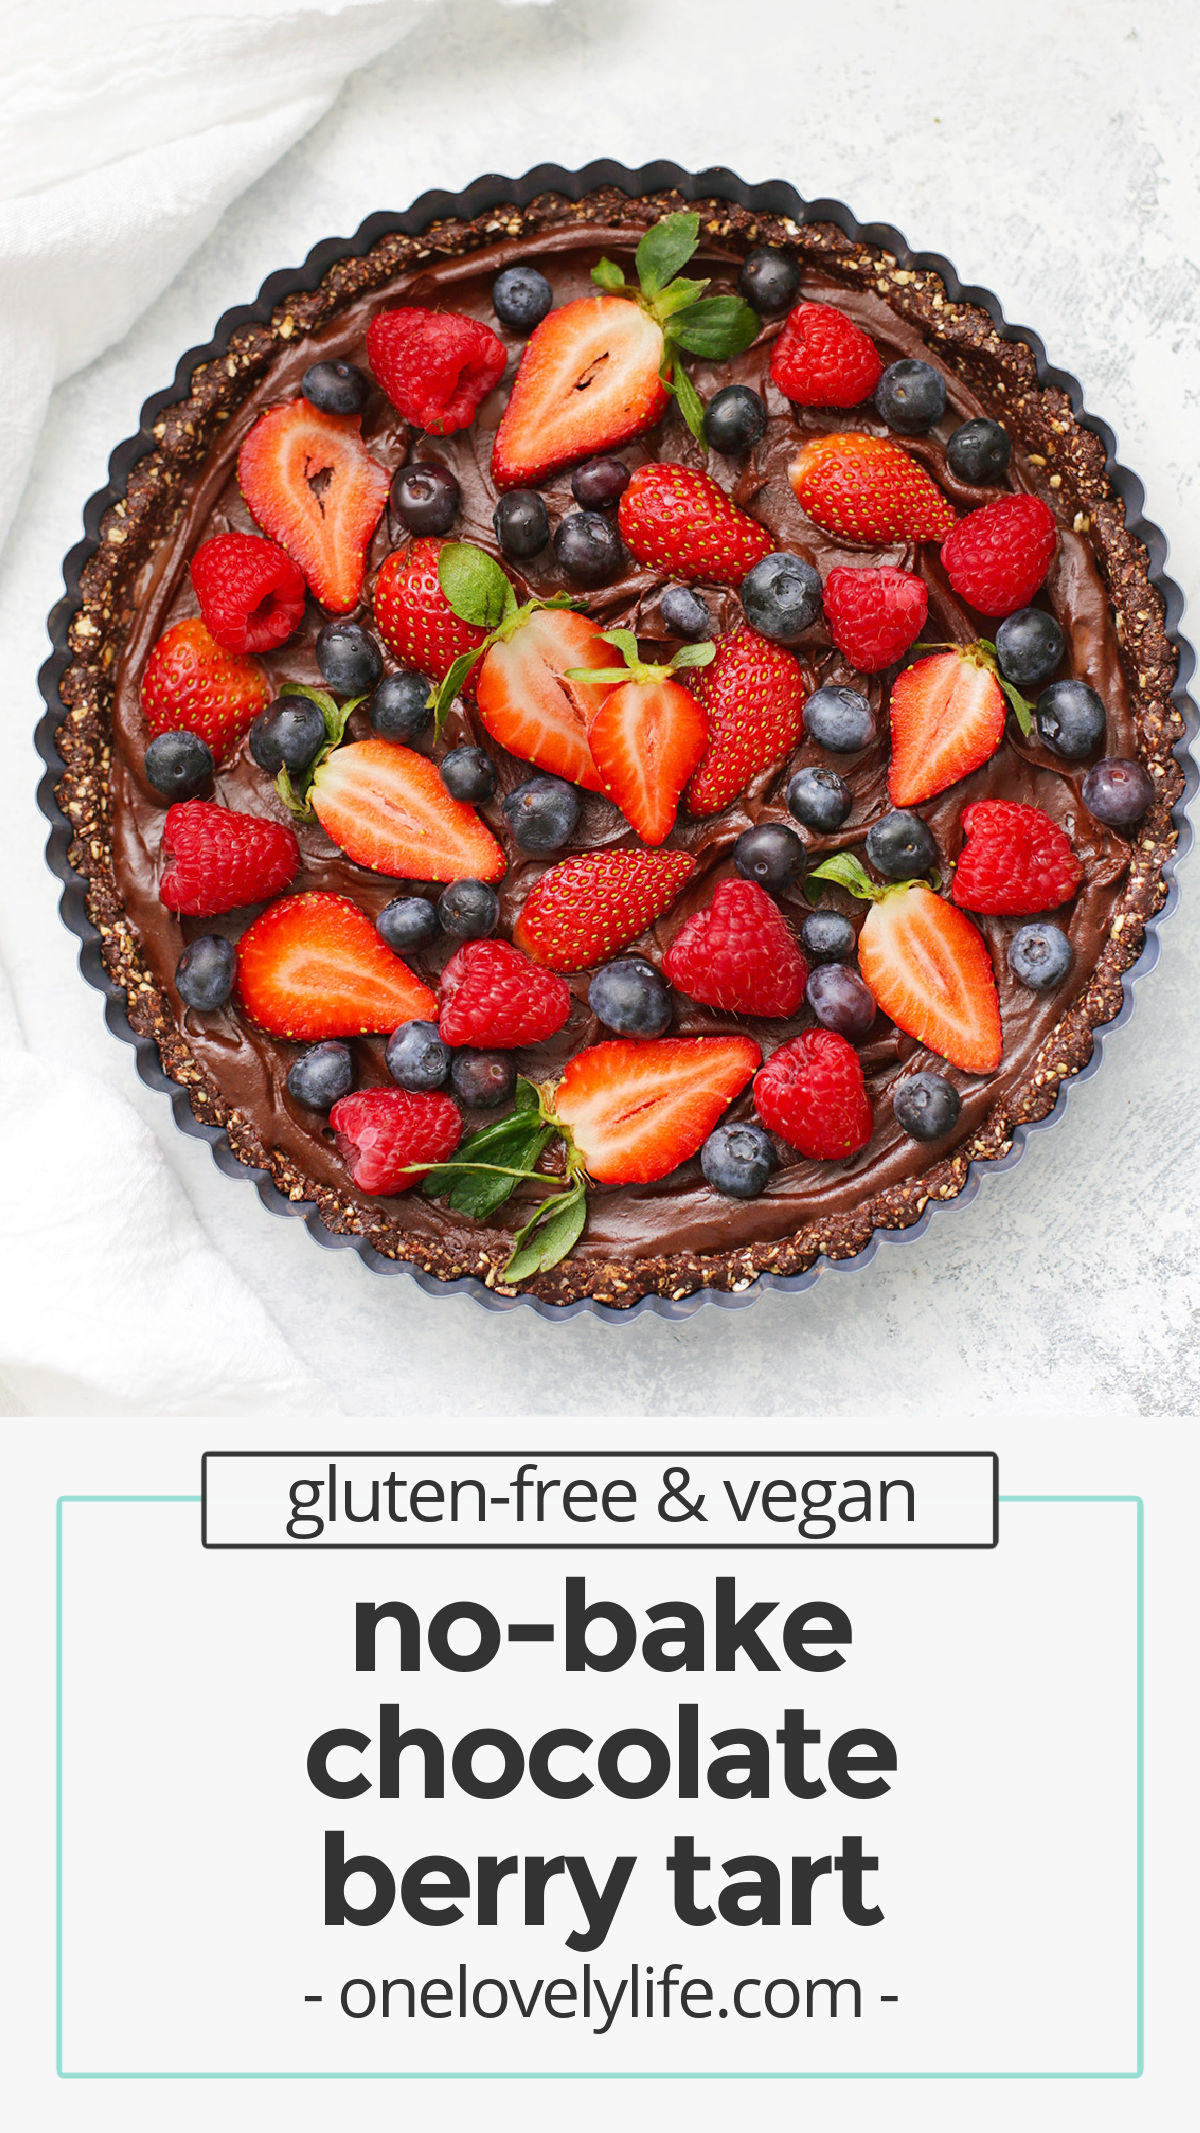 No Bake Chocolate Berry Tart - This gluten free vegan chocolate tart tastes so fresh and luscious. It's gluten free, dairy free, refined sugar free, and really makes a statement. The belle of the ball at any dinner or party! // Dairy free chocolate tart // gluten free chocolate tart // no bake desserts // Valentine's Day Dessert // healthy chocolate tart // no bake chocolate tart // gluten-free chocolate berry tart // dairy free chocolate tart recipe // valentine's day dessert